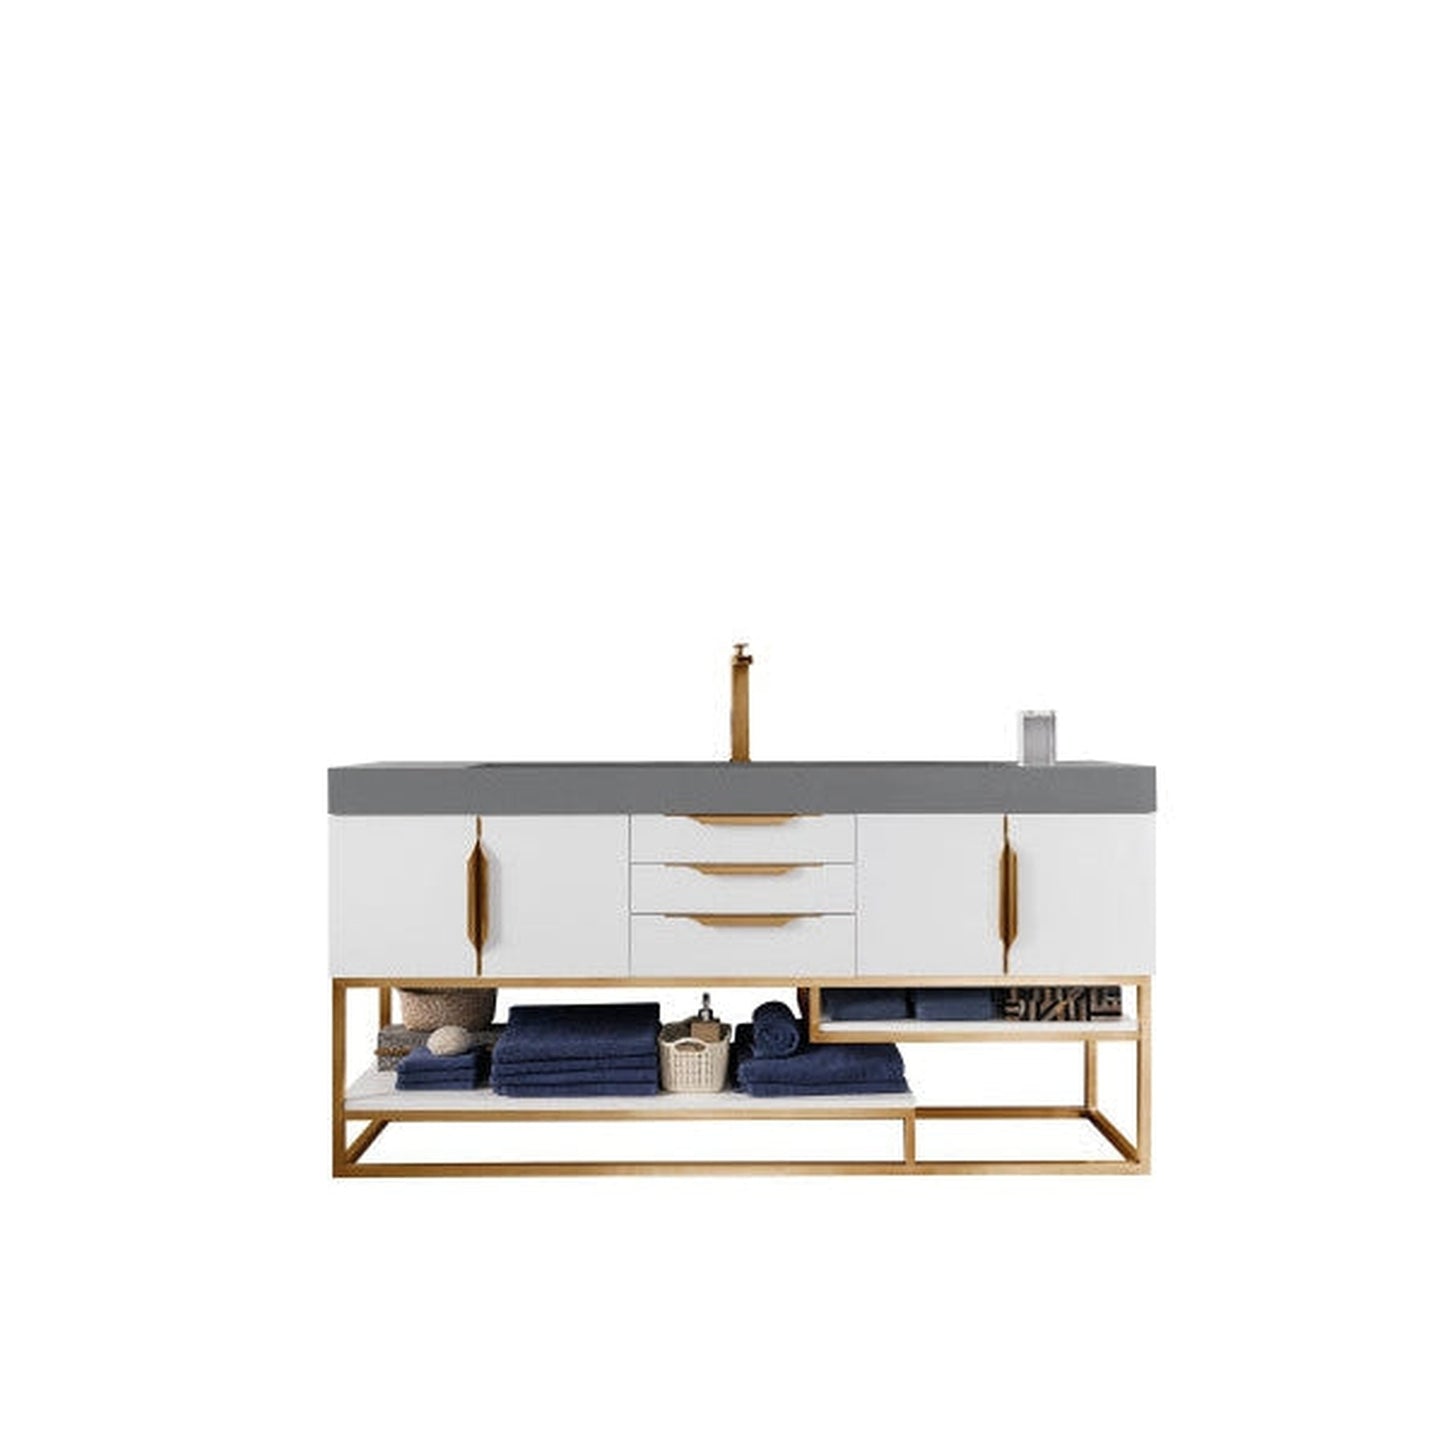 James Martin Columbia 73" Single Glossy White Bathroom Vanity With Radiant Gold Hardware and 6" Glossy Dusk Gray Composite Countertop